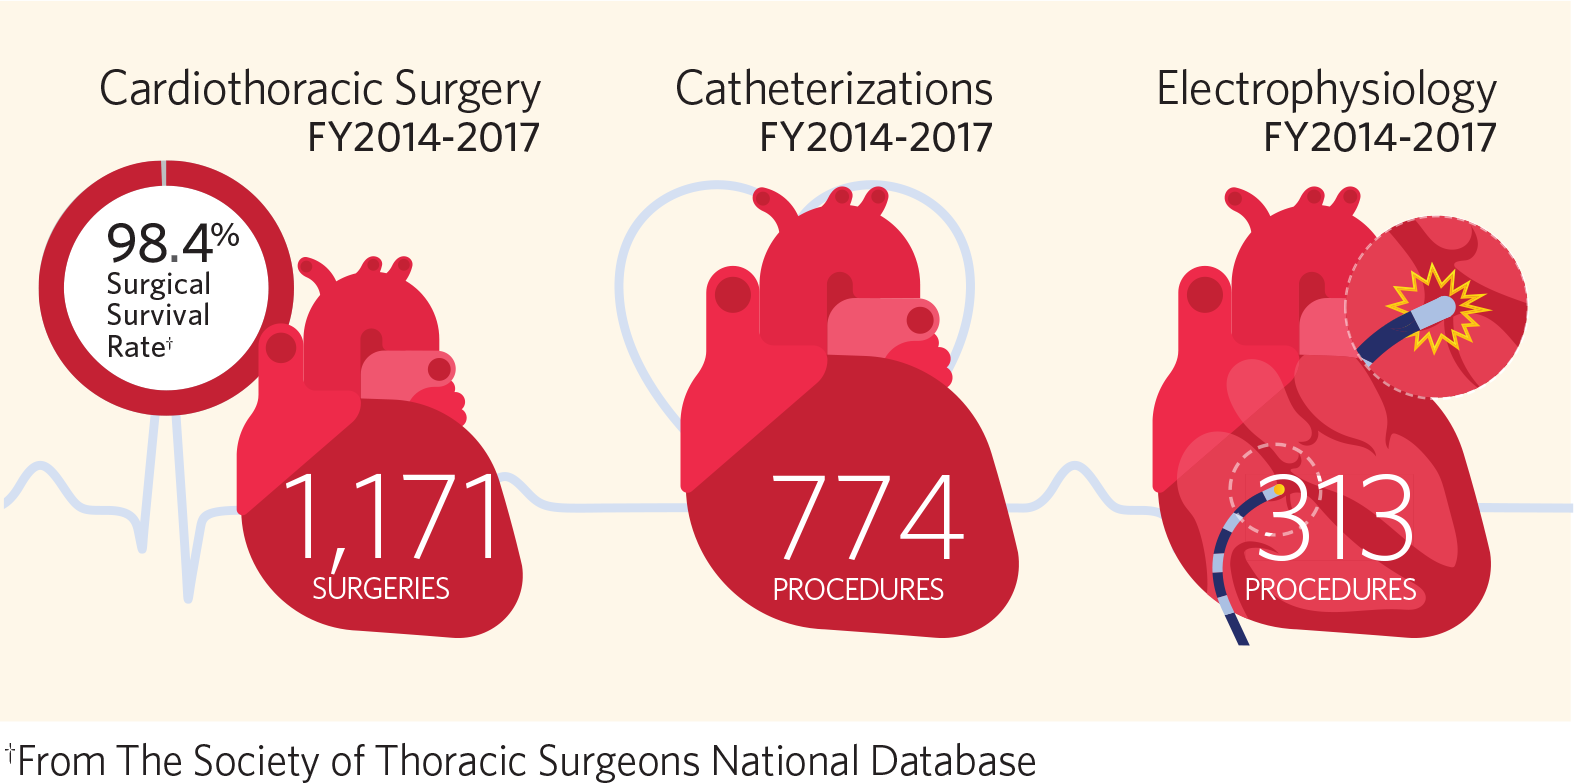 Cardiothoracic Surgical Survival Rate